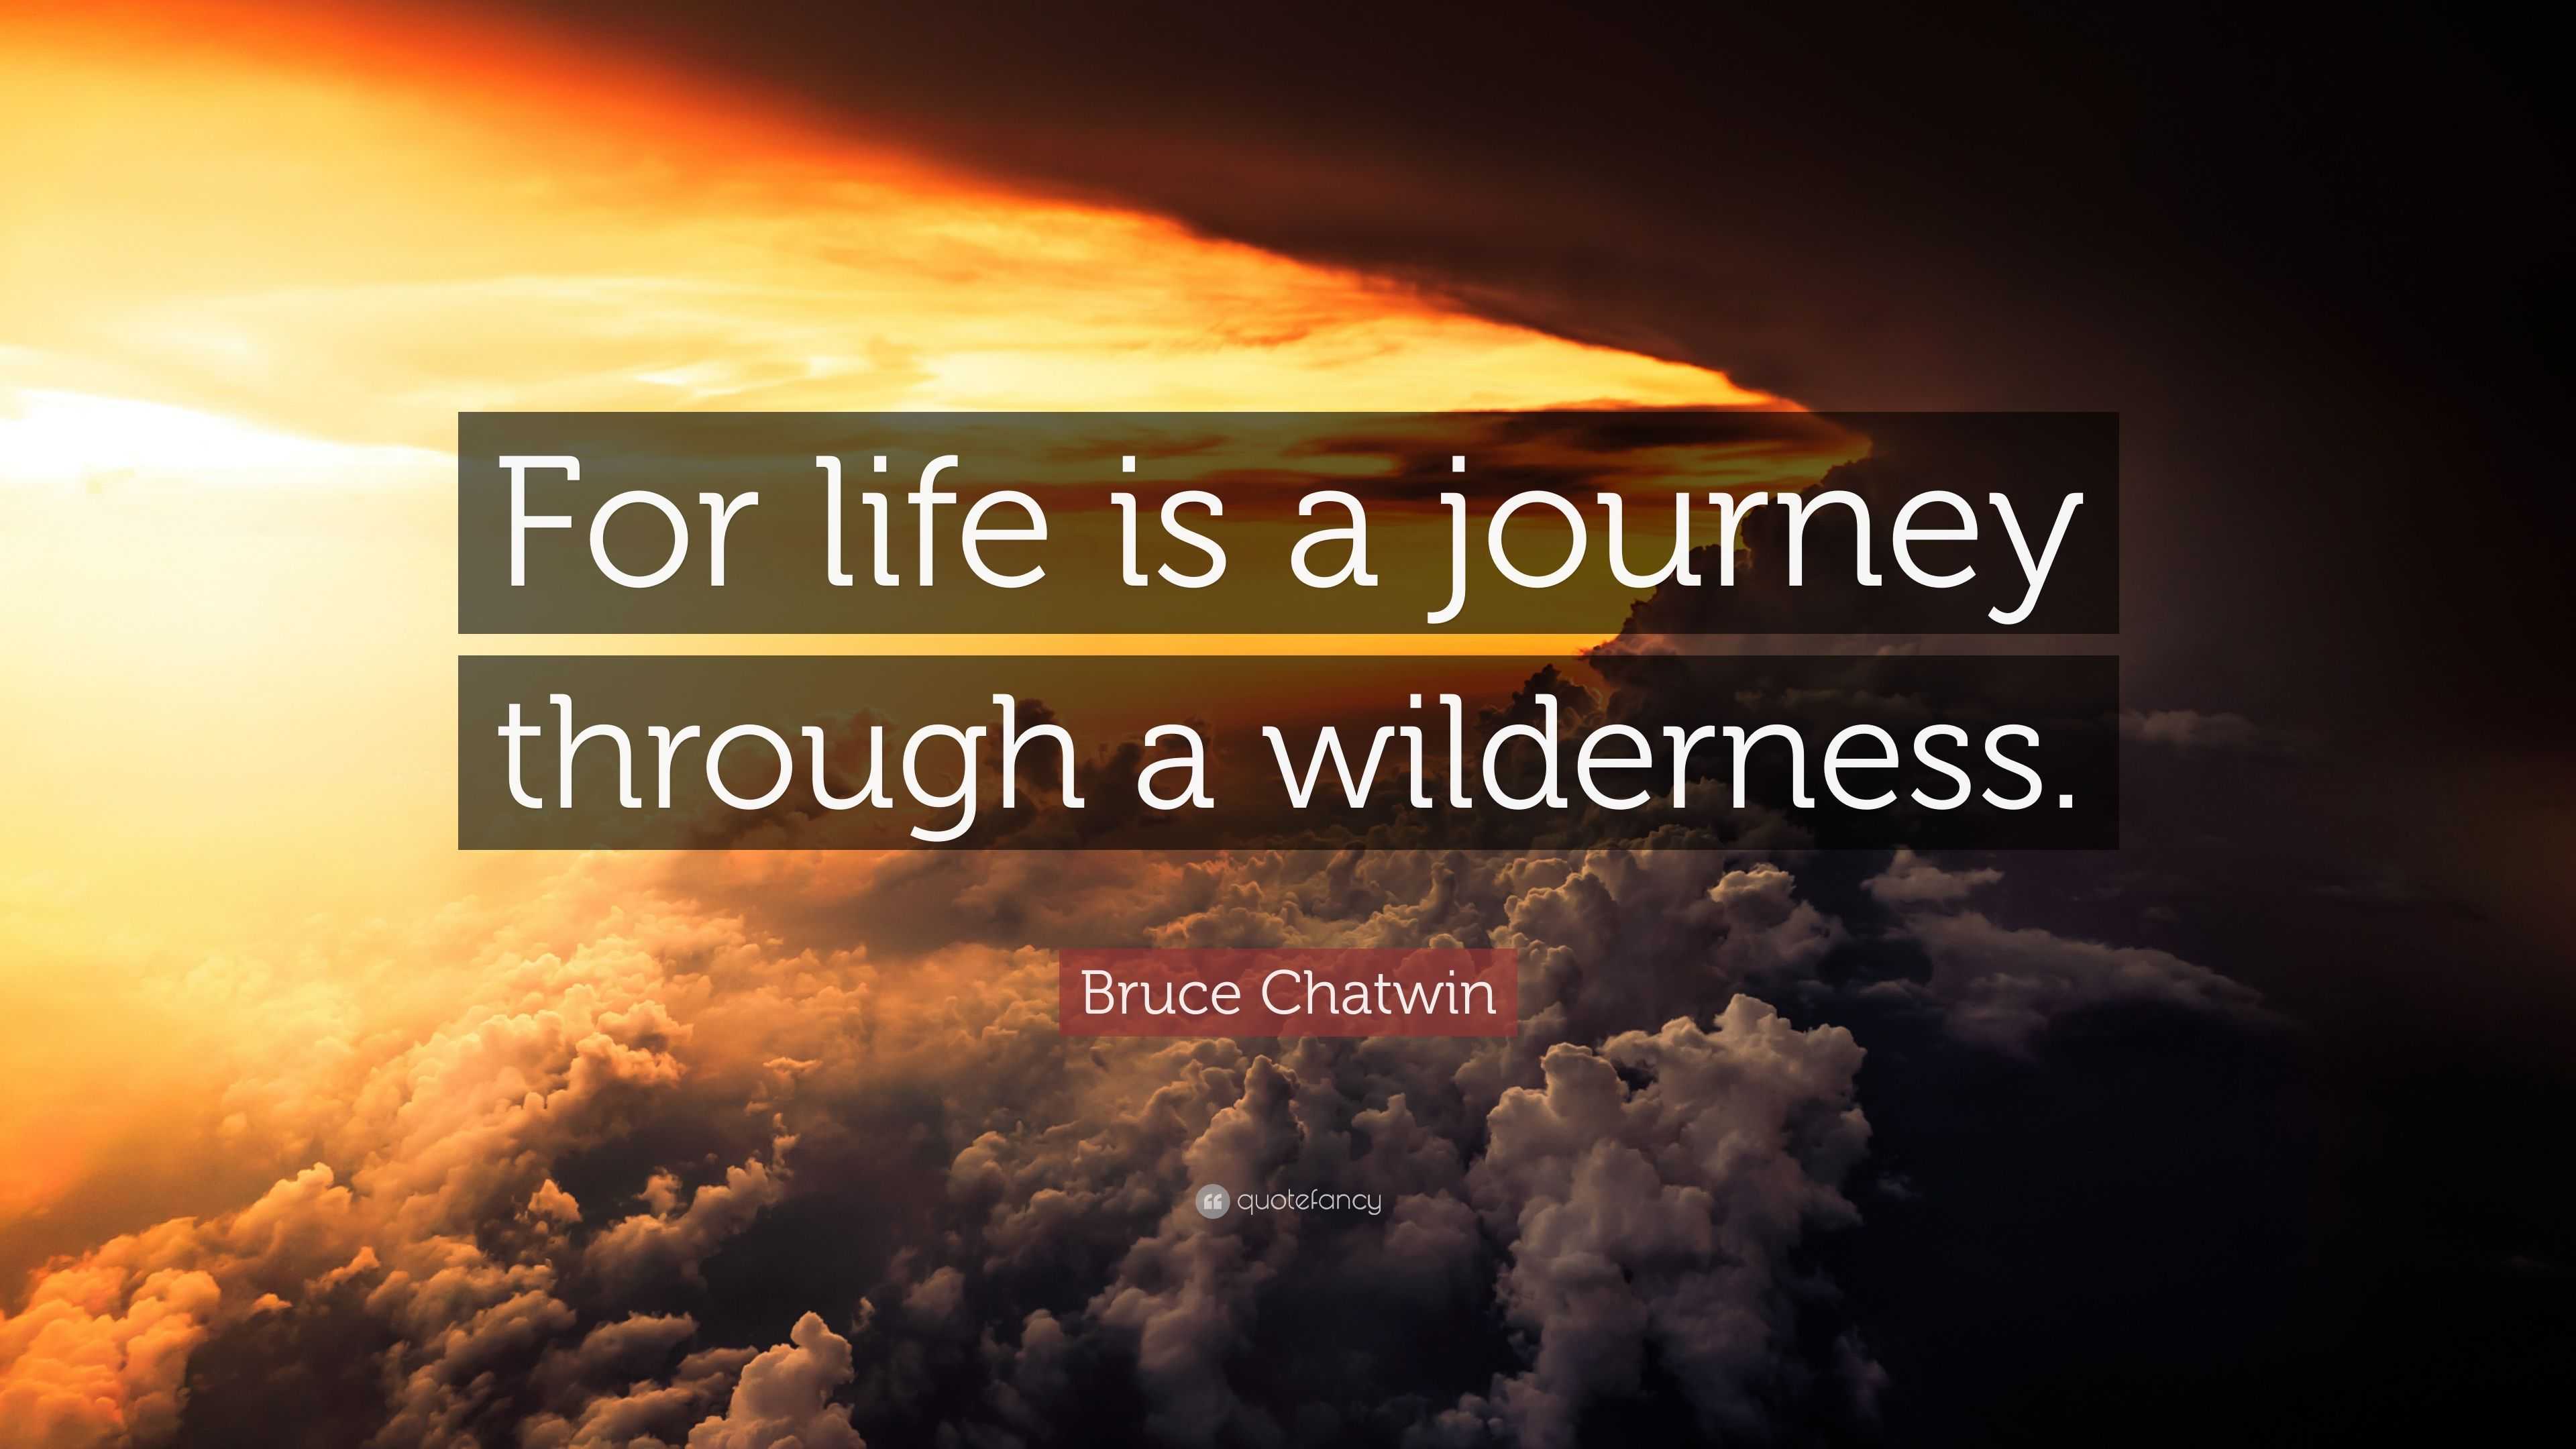 bruce chatwin travel quotes